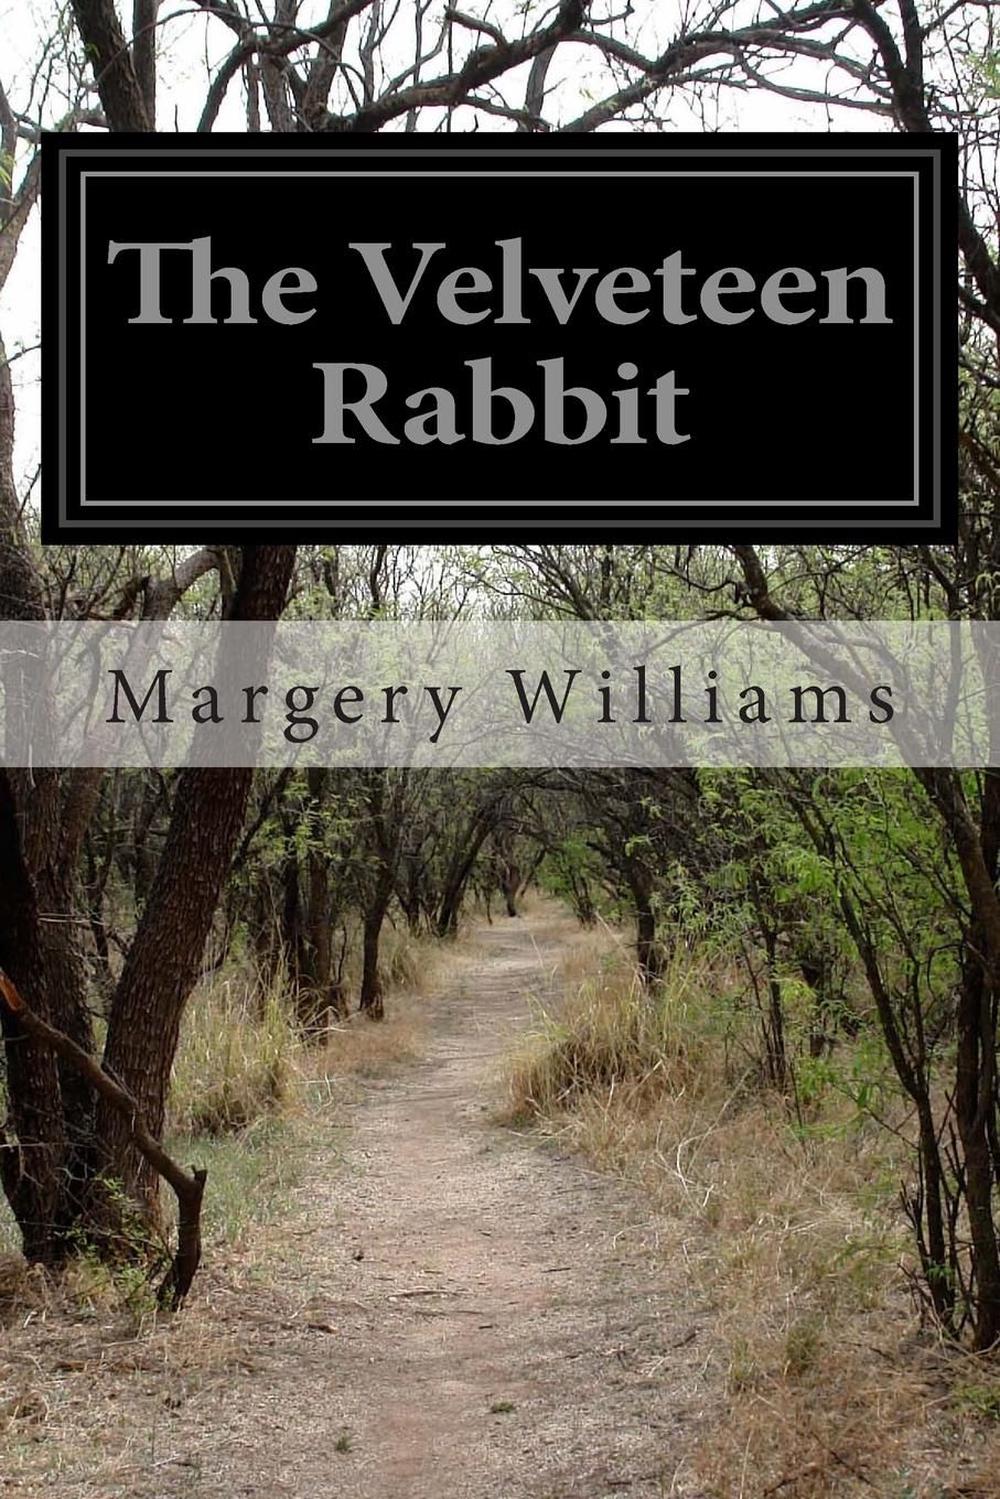 The Velveteen Rabbit Or, How Toys Become Real by Margery Williams